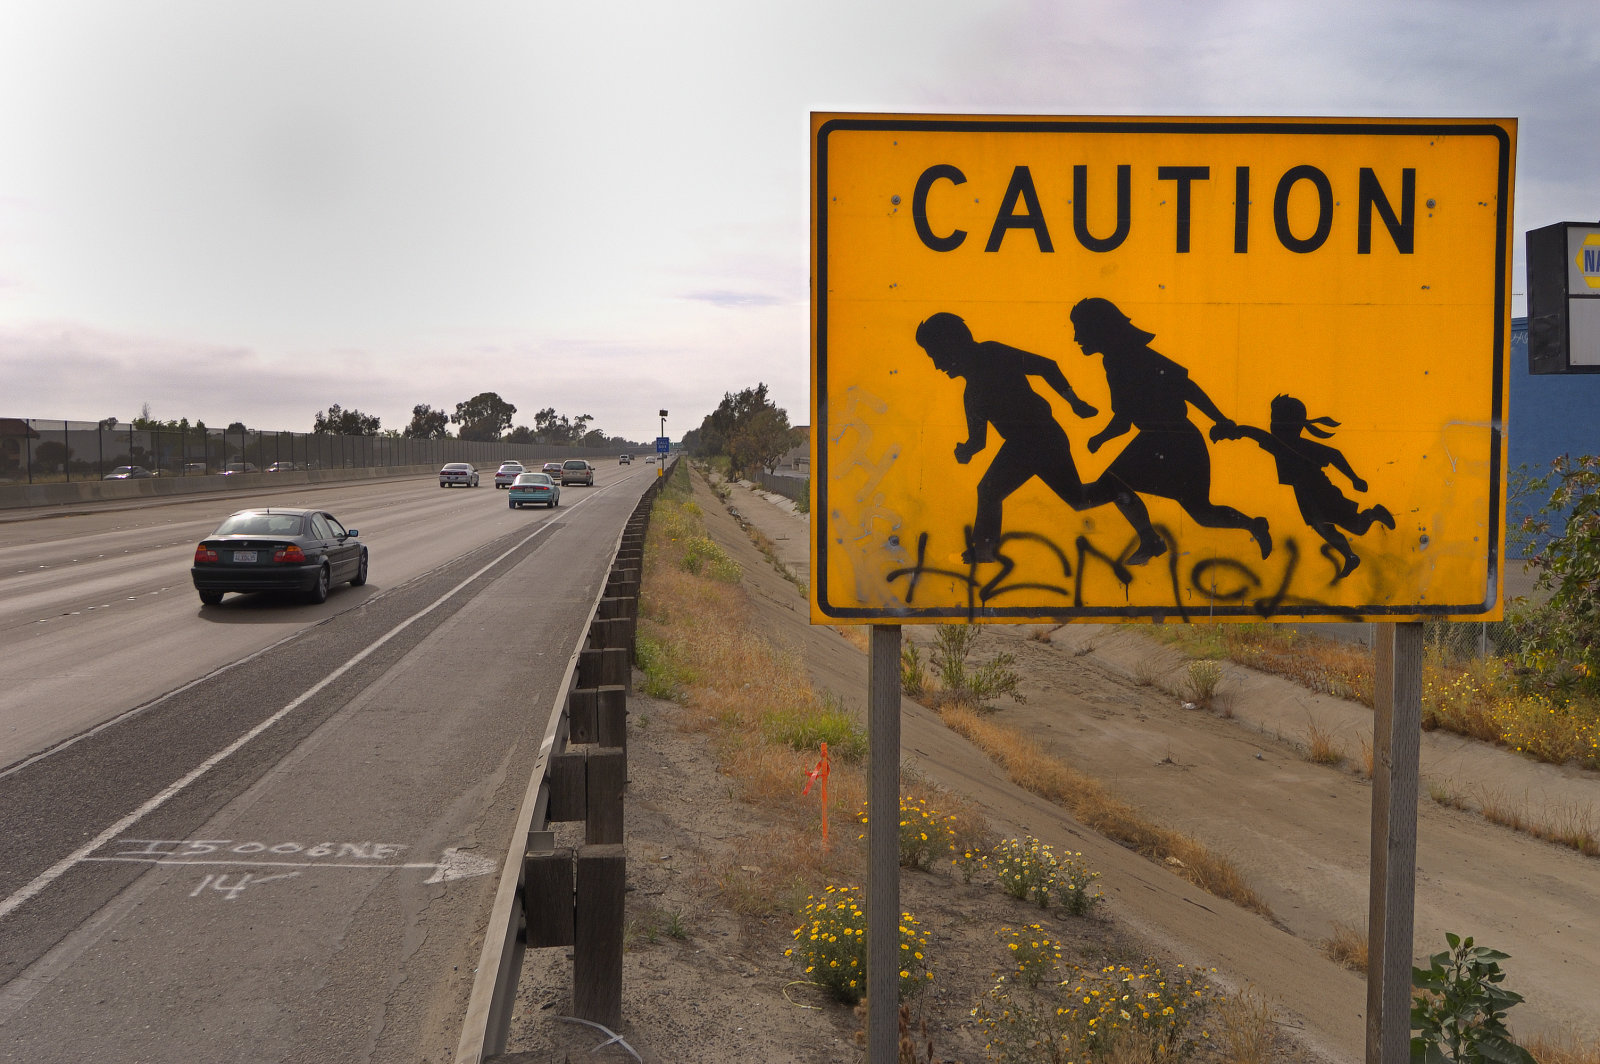 A road sign, along Interstate Highway 5 near San Ysidro, California, warns motorists to watch out for migrant workers crossing the highway. According to the US Border Patrol, 1,954 people died crossing the U.S.-Mexico border illegally between the years 1998-2004. The United States office of Homeland Security has plans to expand border security between the two countries in an attempt to stem the tide of illegal immigrants entering the USA from Mexico. (Photo by Christopher Morris/Corbis via Getty Images)